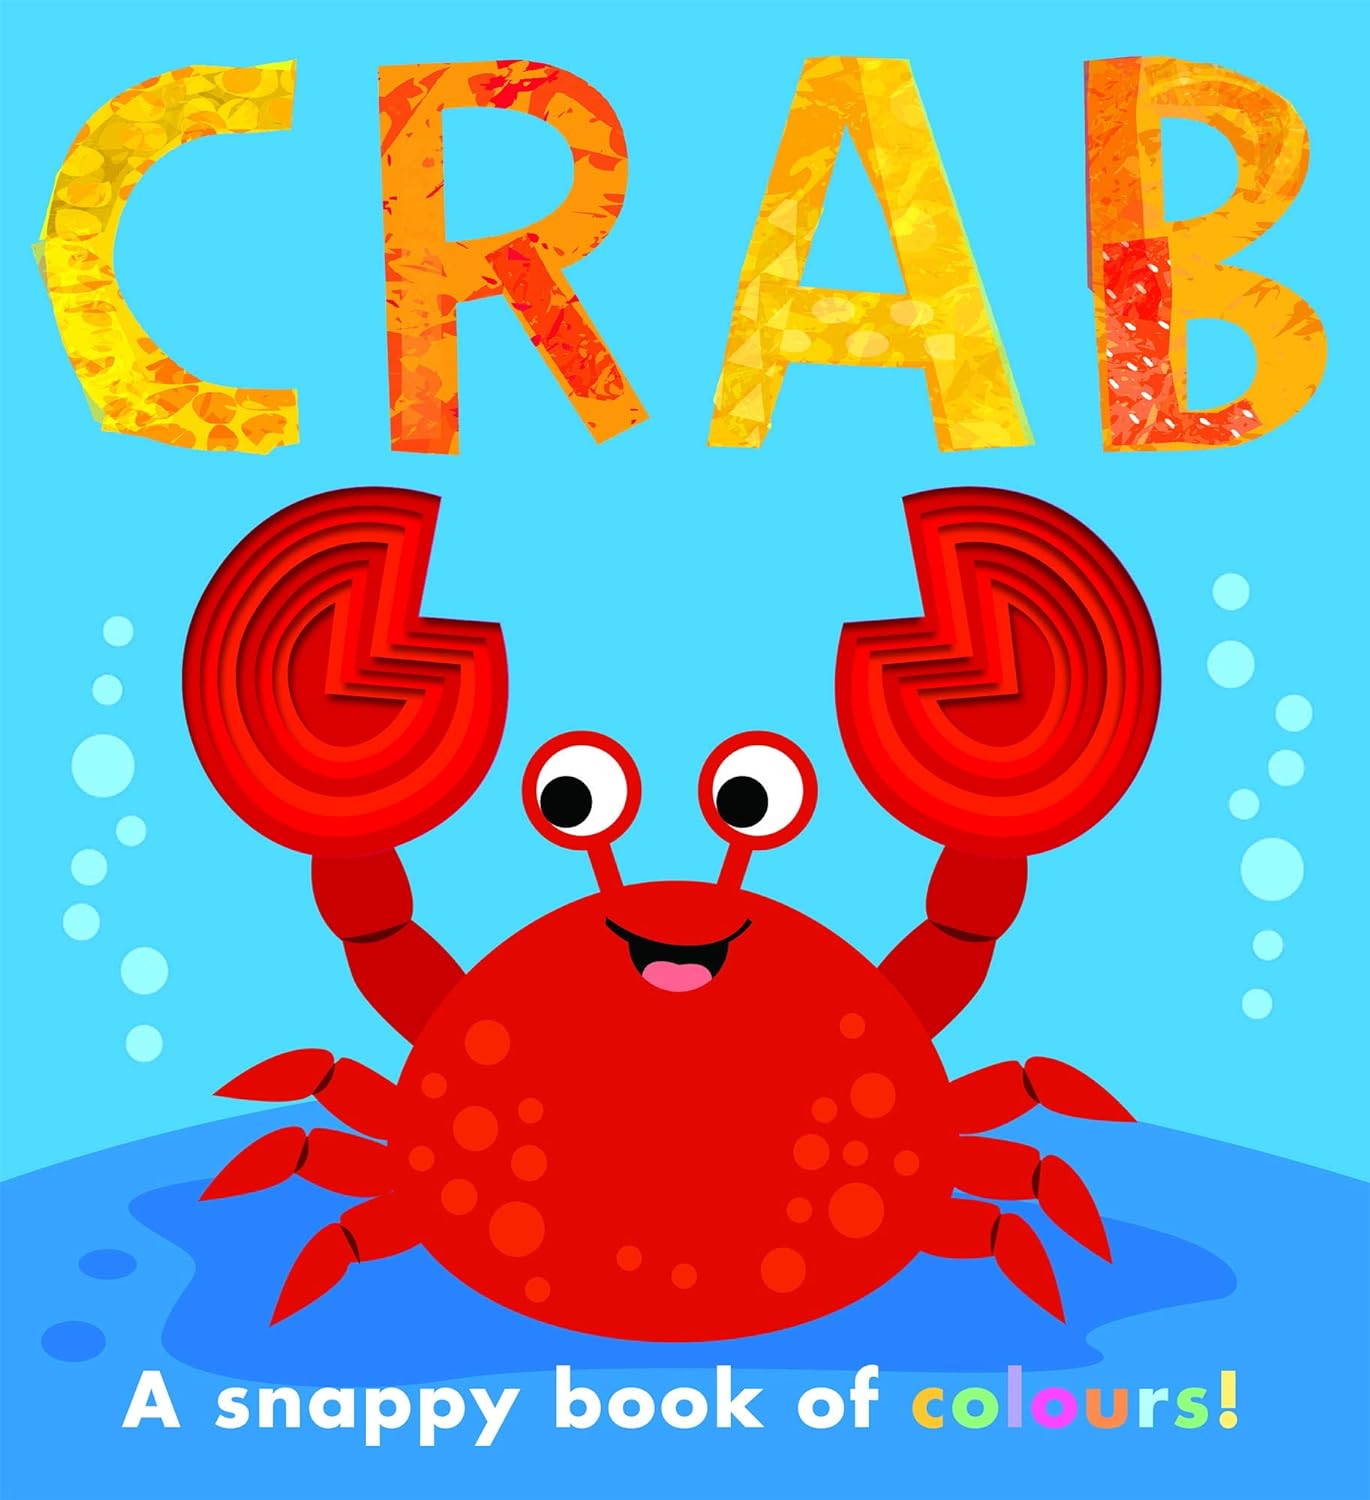 Crab a snappy book of colours